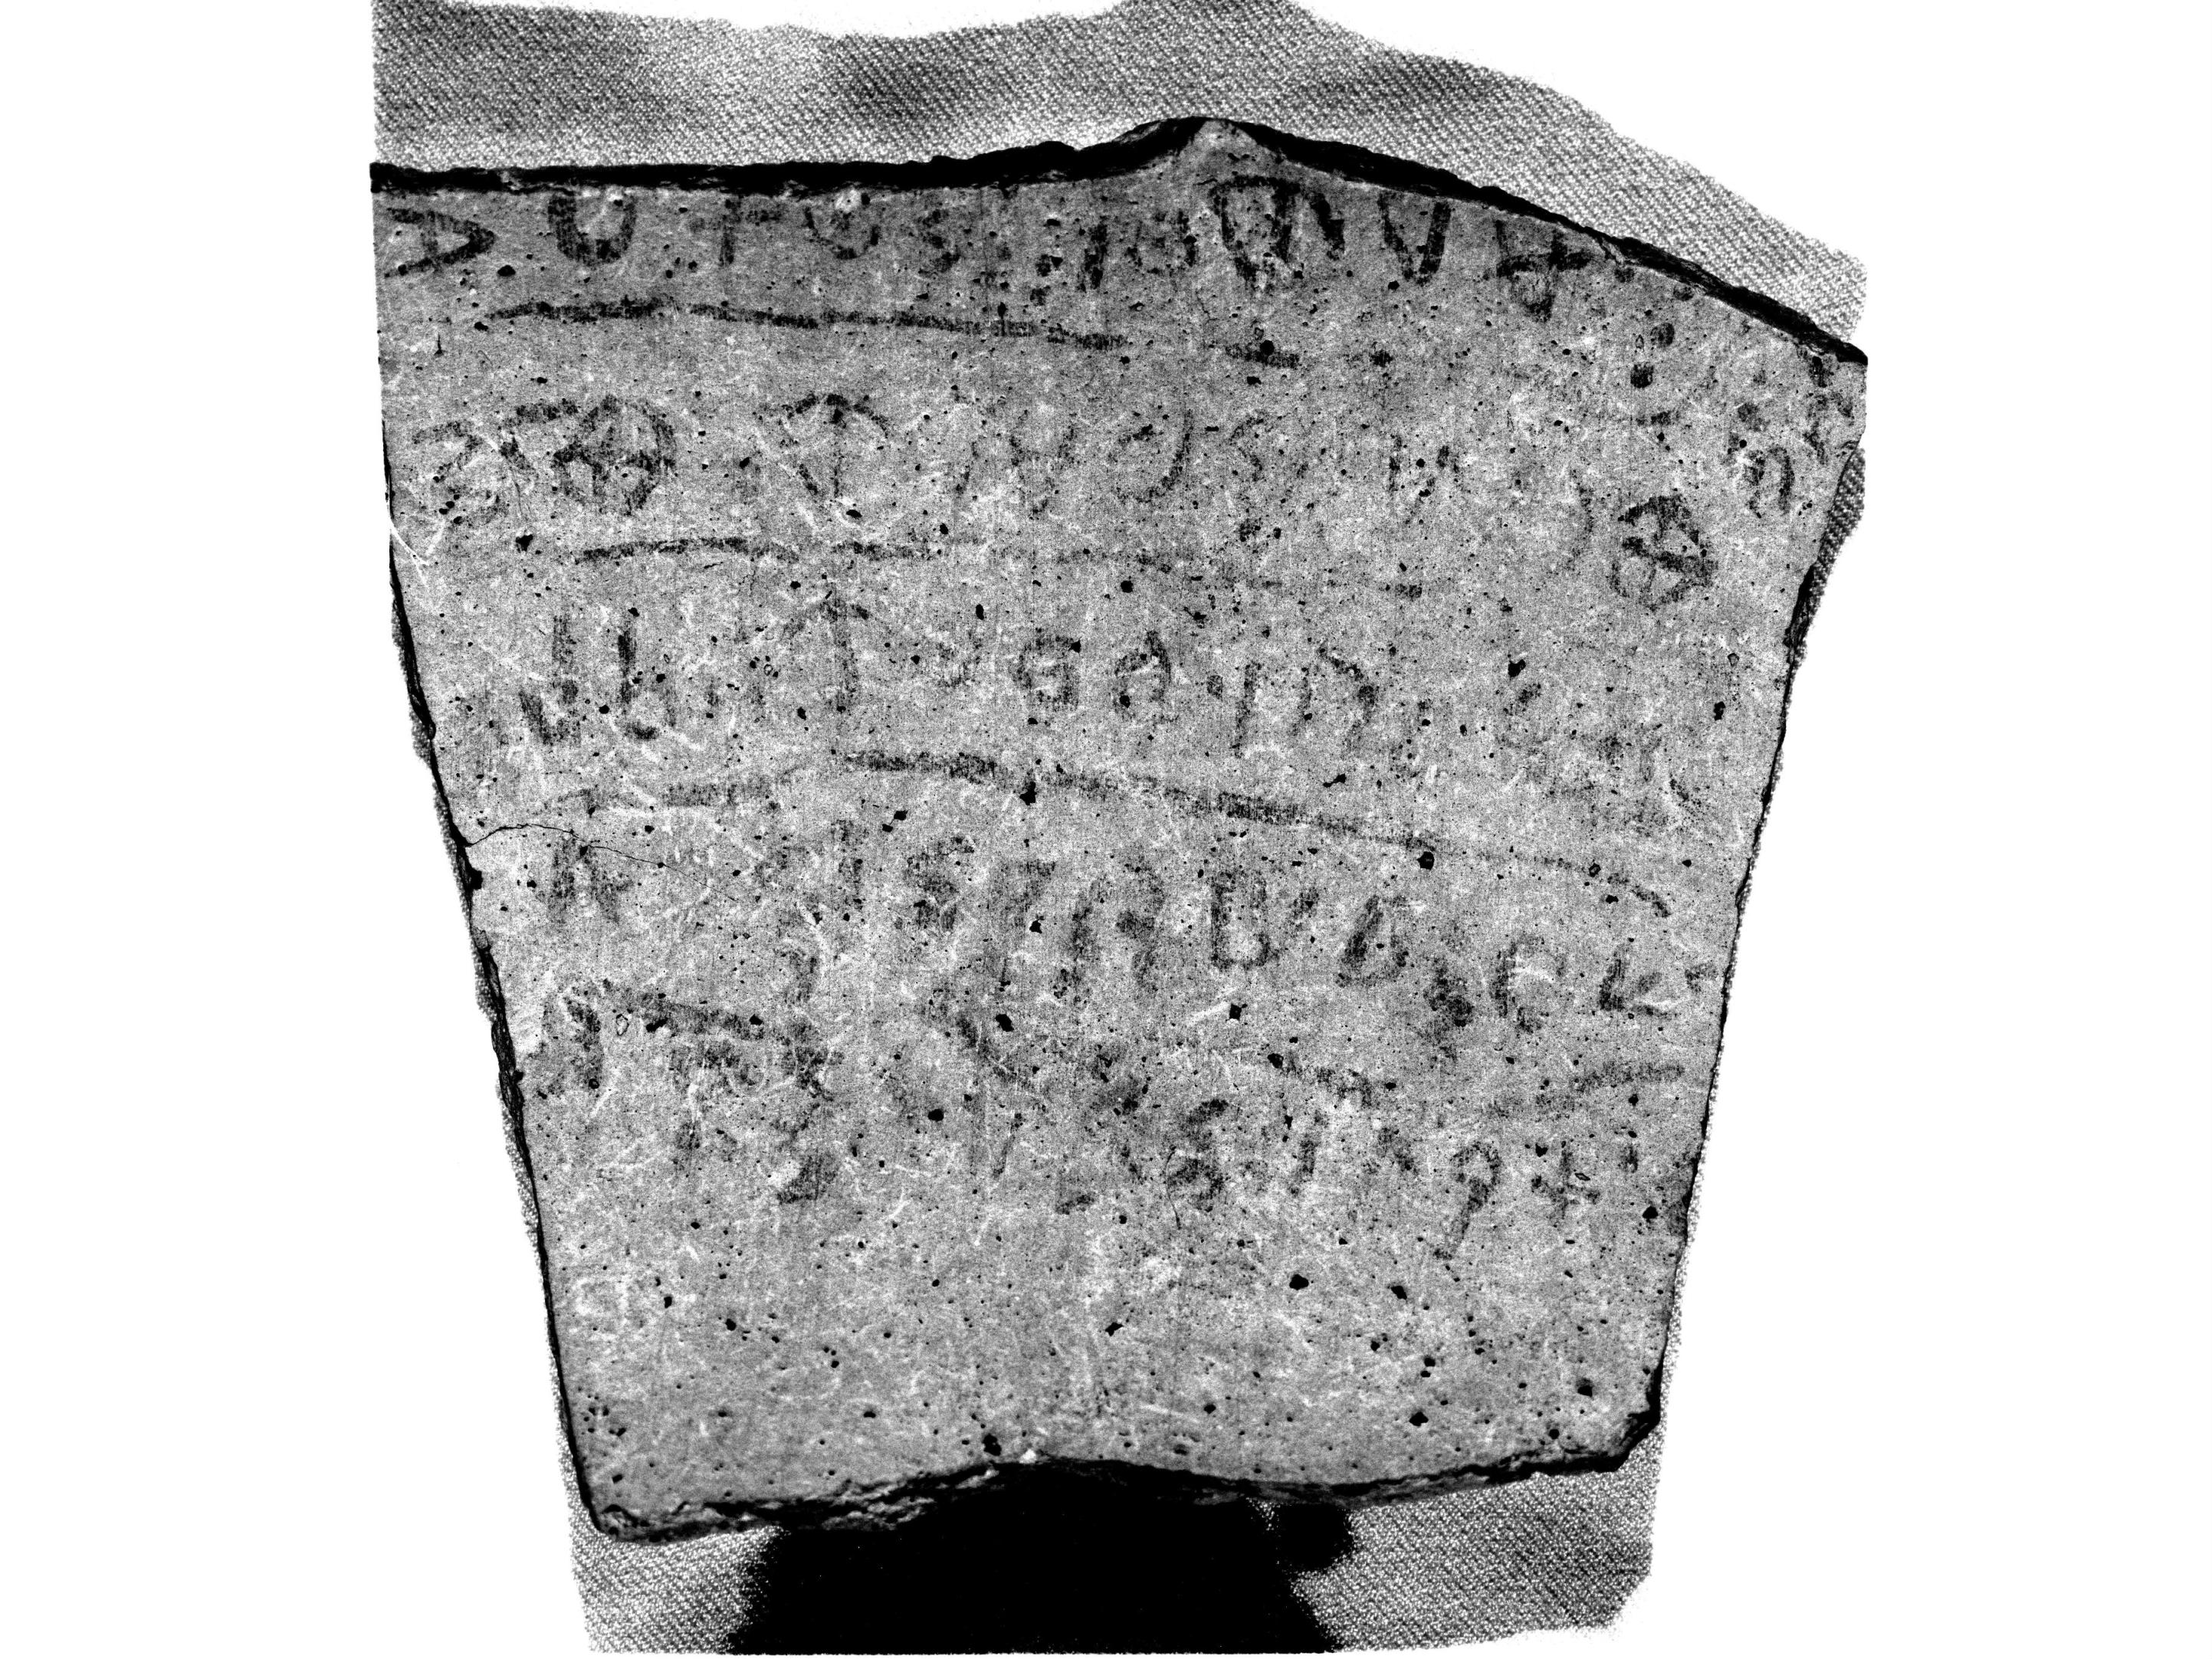 Illustration 8: Ink pottery inscription discovered at Khirbet Qeiyafa, the oldest such inscription in Hebrew